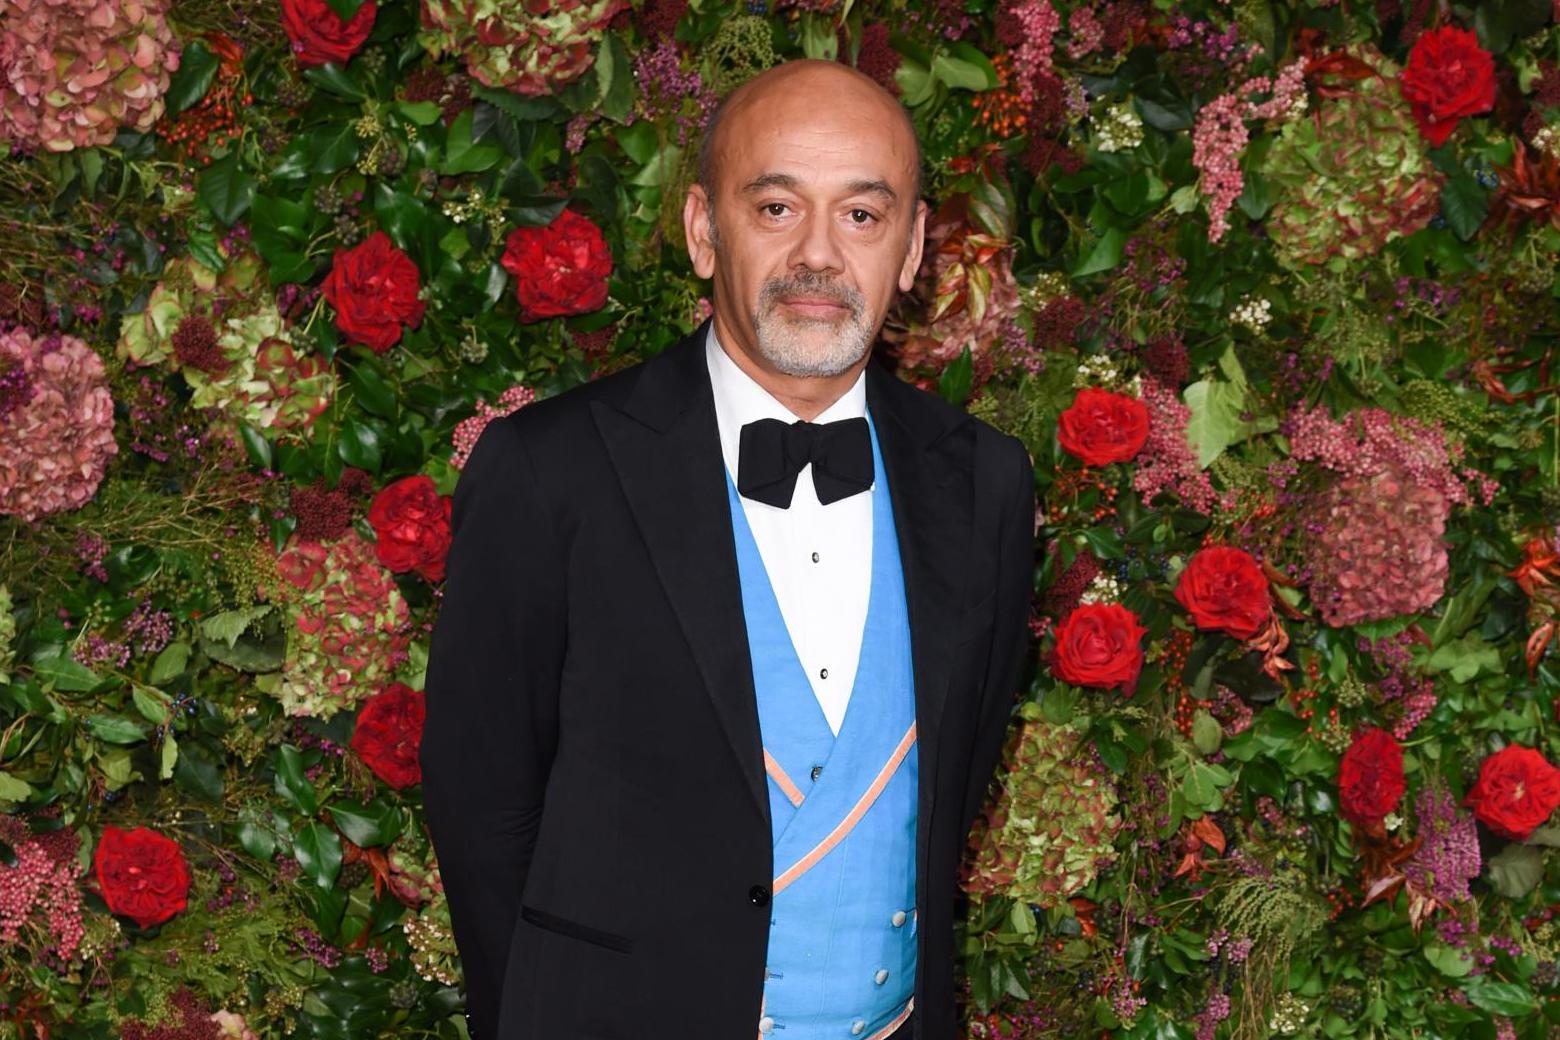 Christian Louboutin interview: 'I once thought I saw Queen my shoes' | The